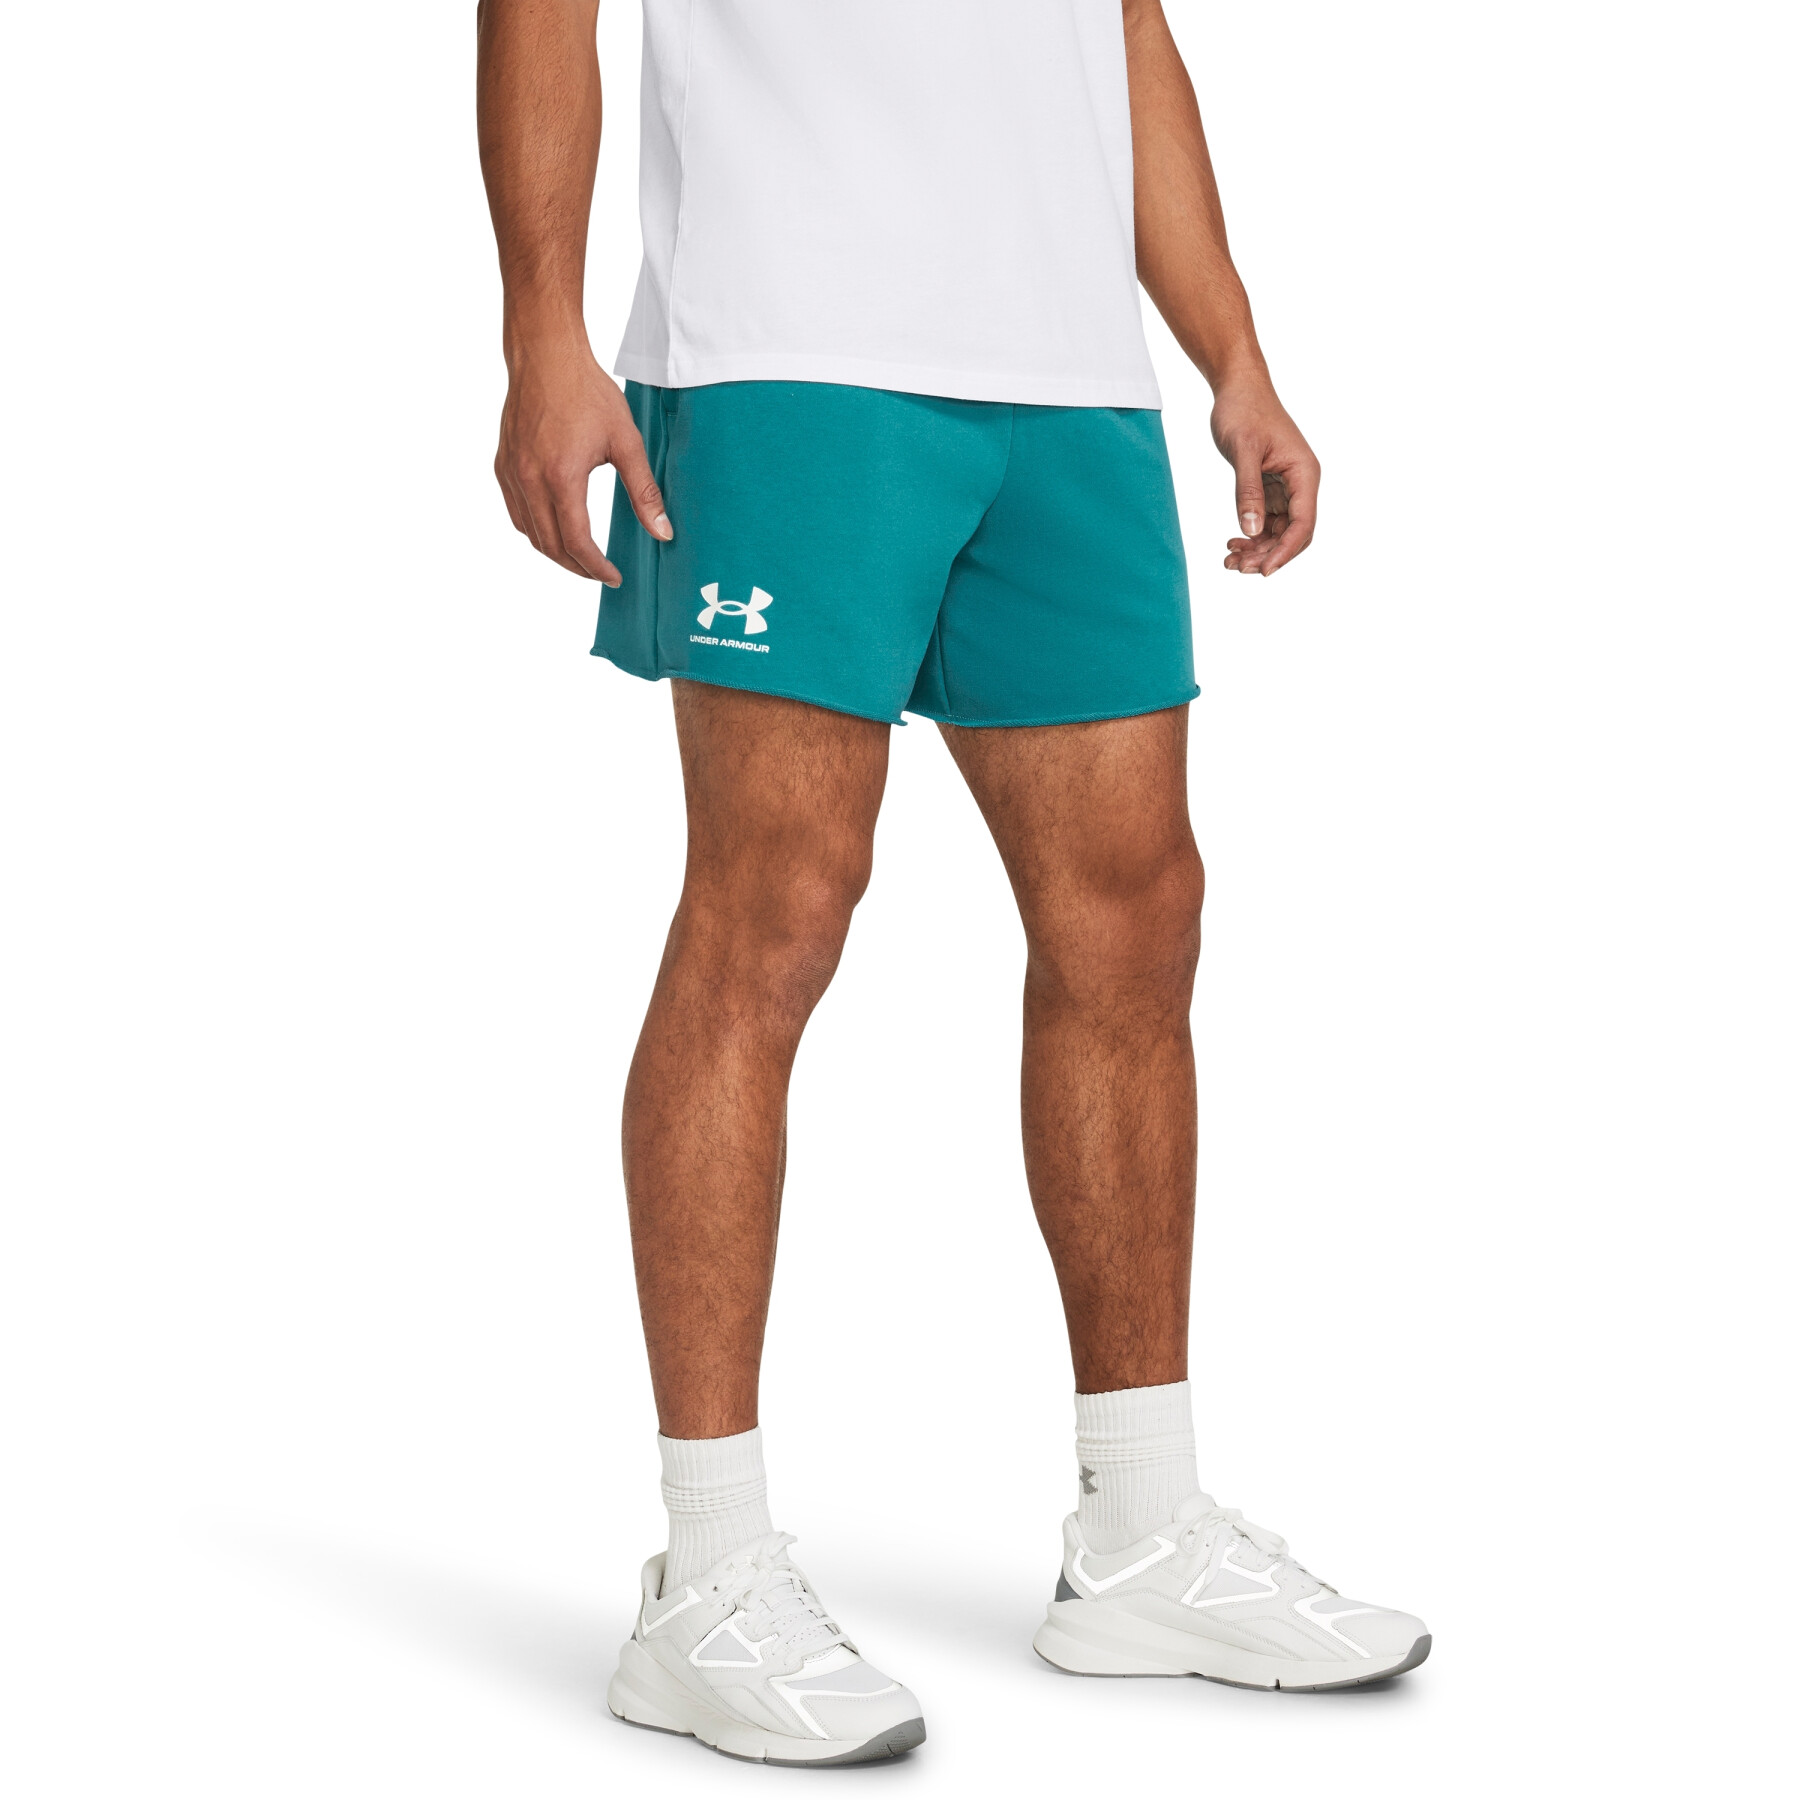 Shorts Under Armour Rival Terry 6"